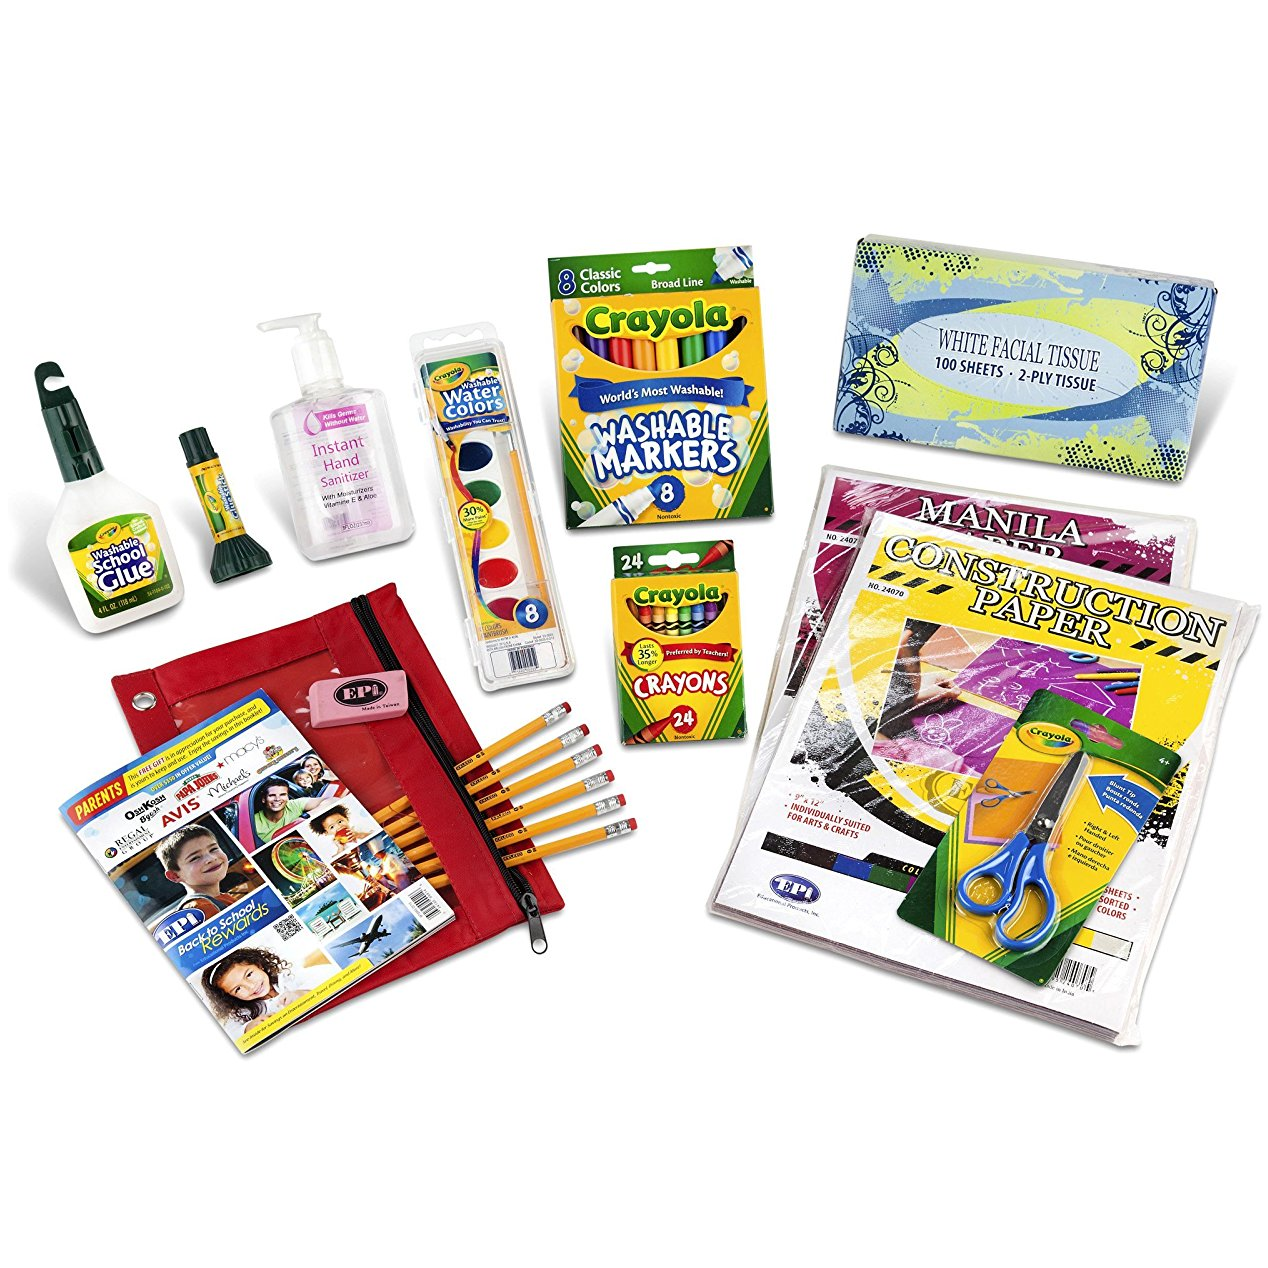 Kindergarten Classroom Supply Pack Only $8.19! Great For at Home Use or at School!